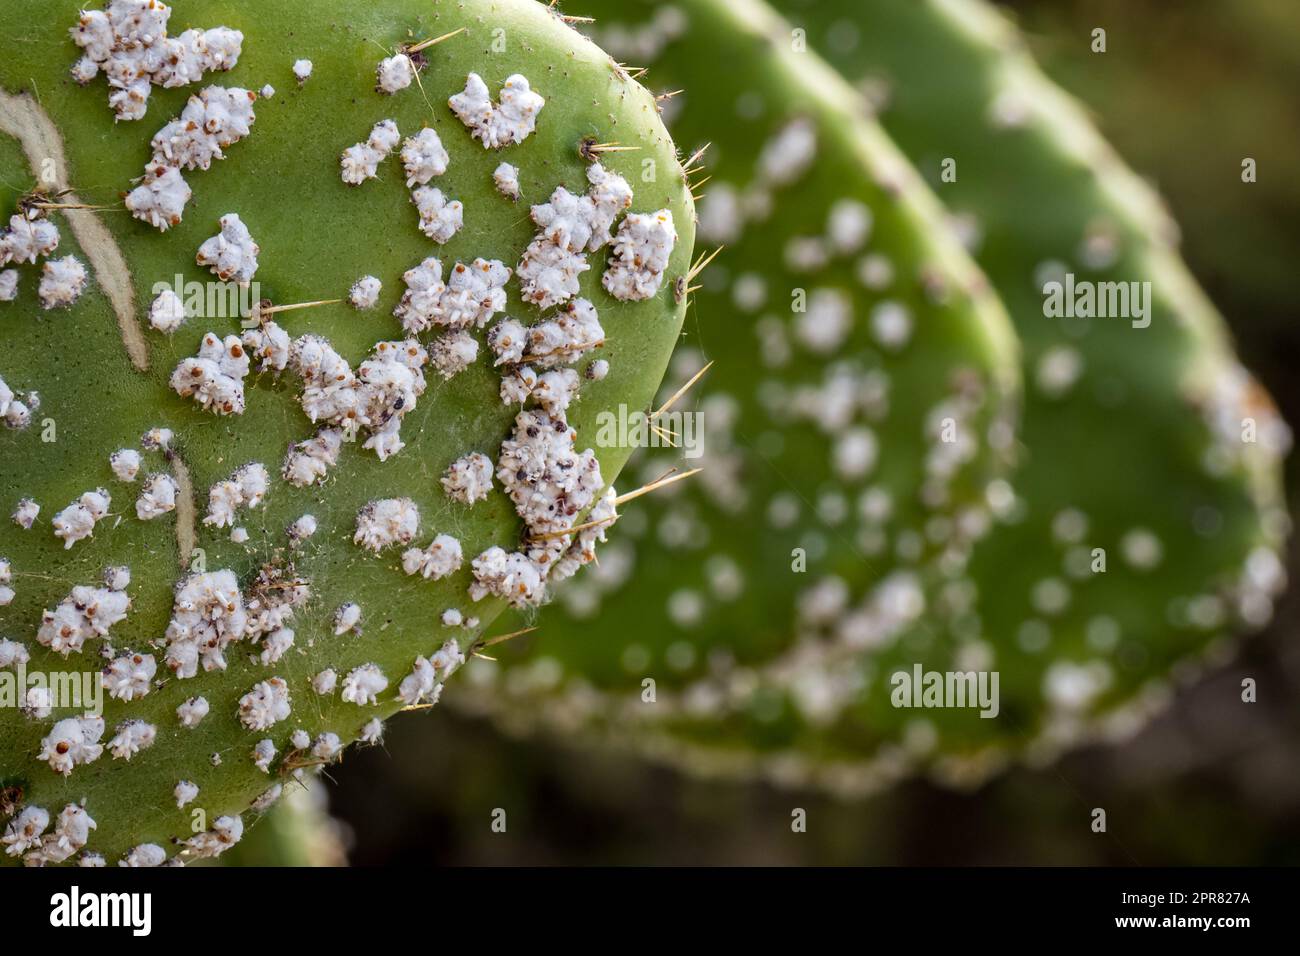 Waxy white clusters of Cochineal scale insect nymphs (Dactylopius Coccus) on a cactus, ready to harvest carminic acid to produce carmine dye. Stock Photo